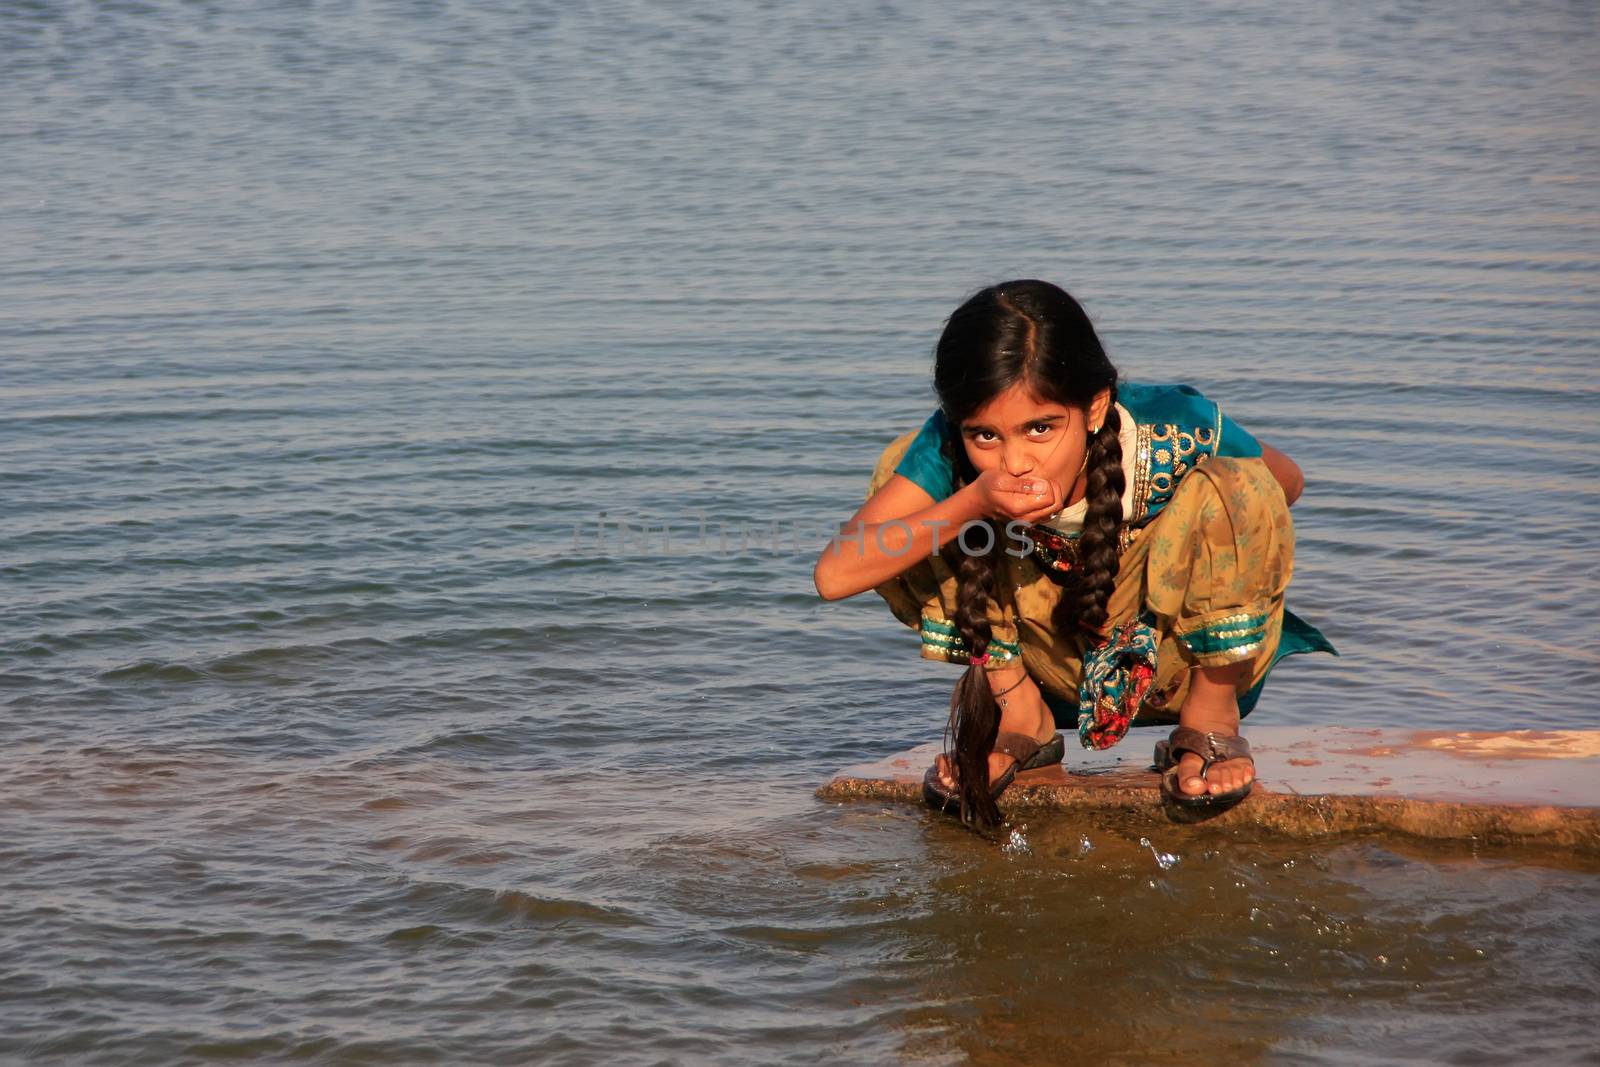 Local girl drinking from water reservoir, Khichan village, Rajasthan, India